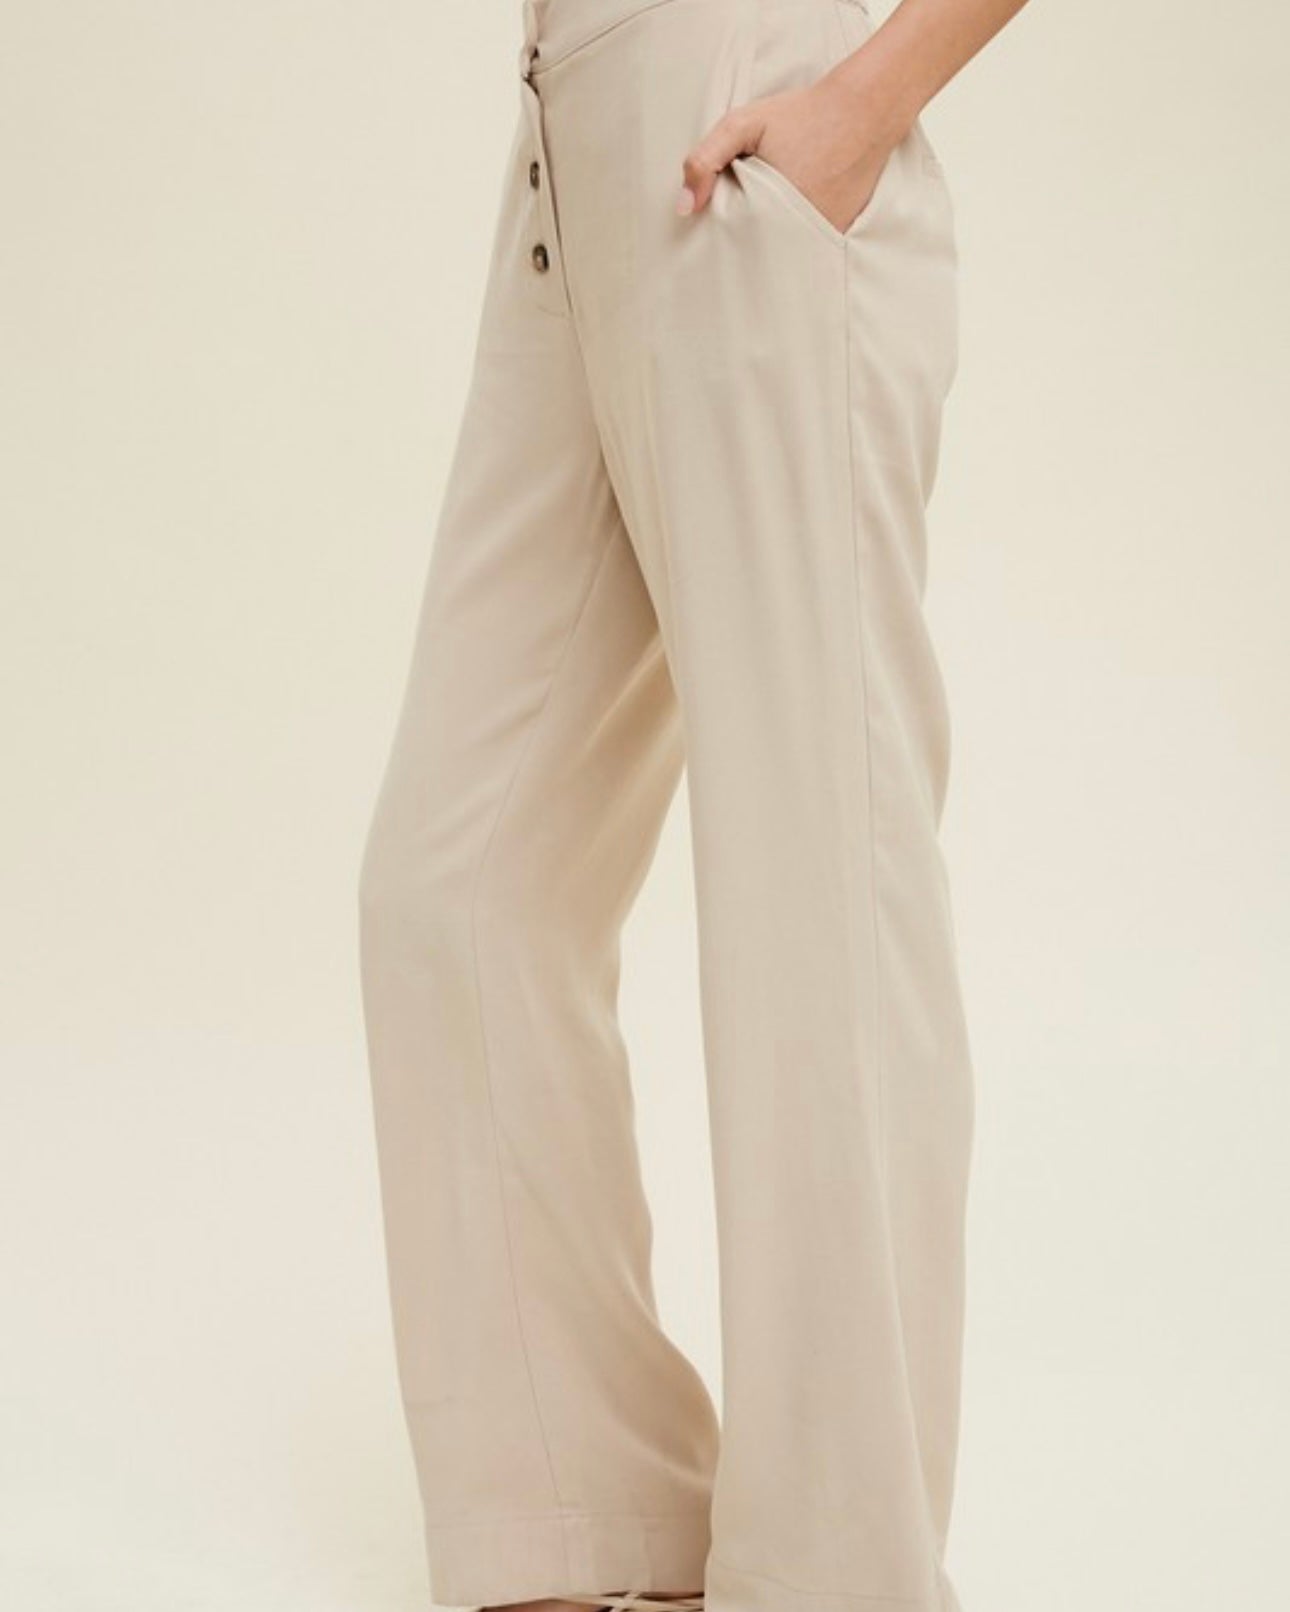 Button-Up Detail with Pockets Pant